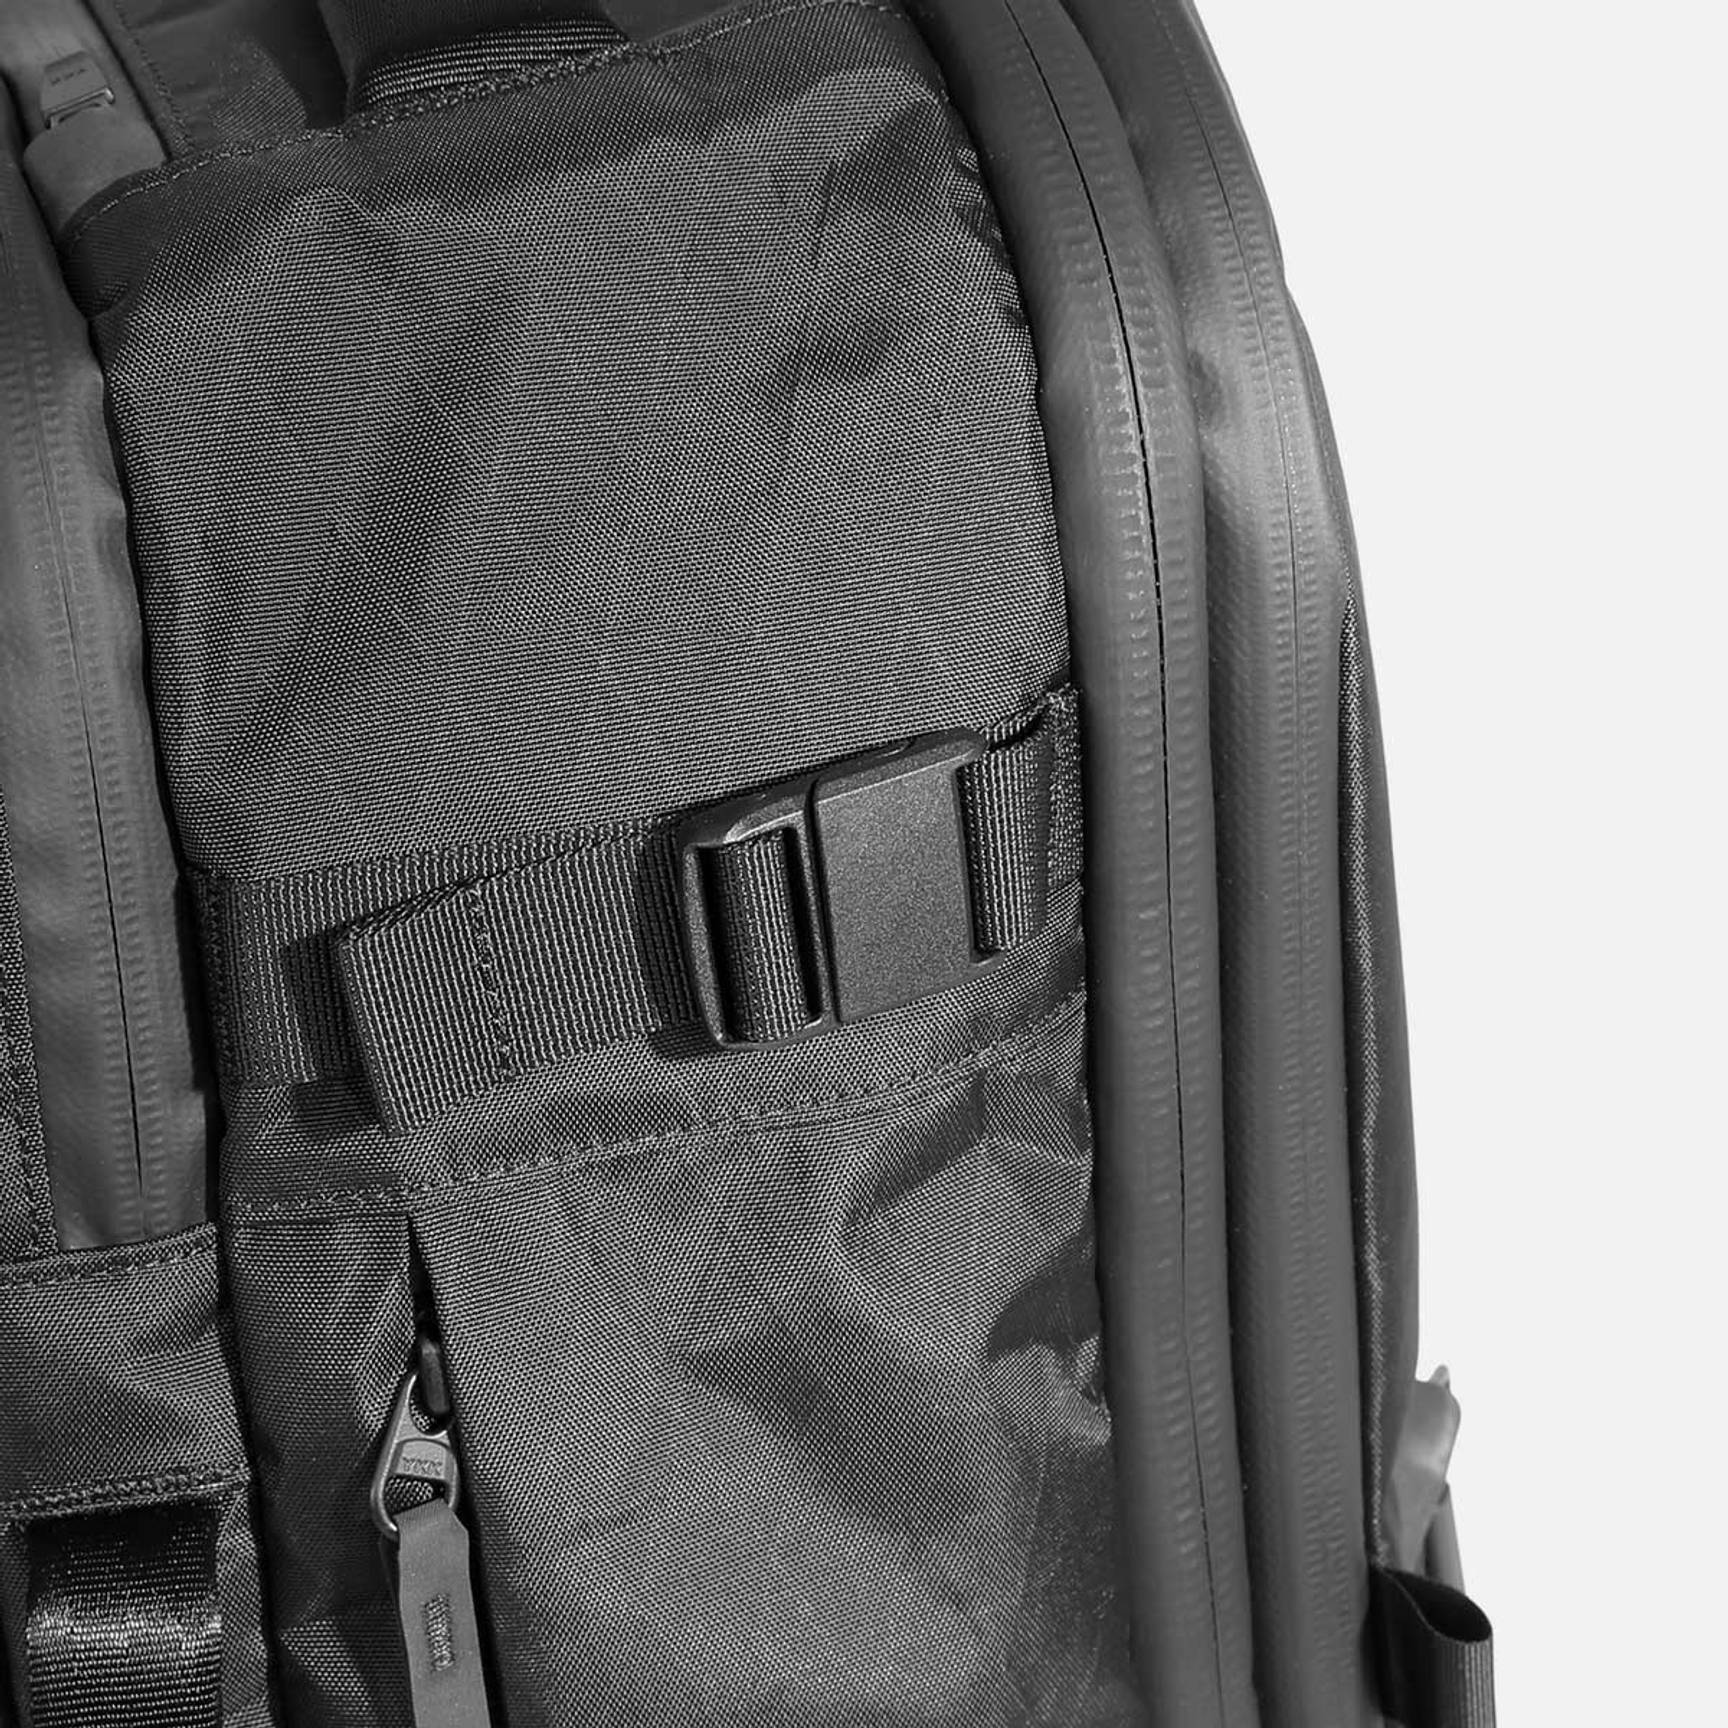 Travel Pack 3 Small X-Pac